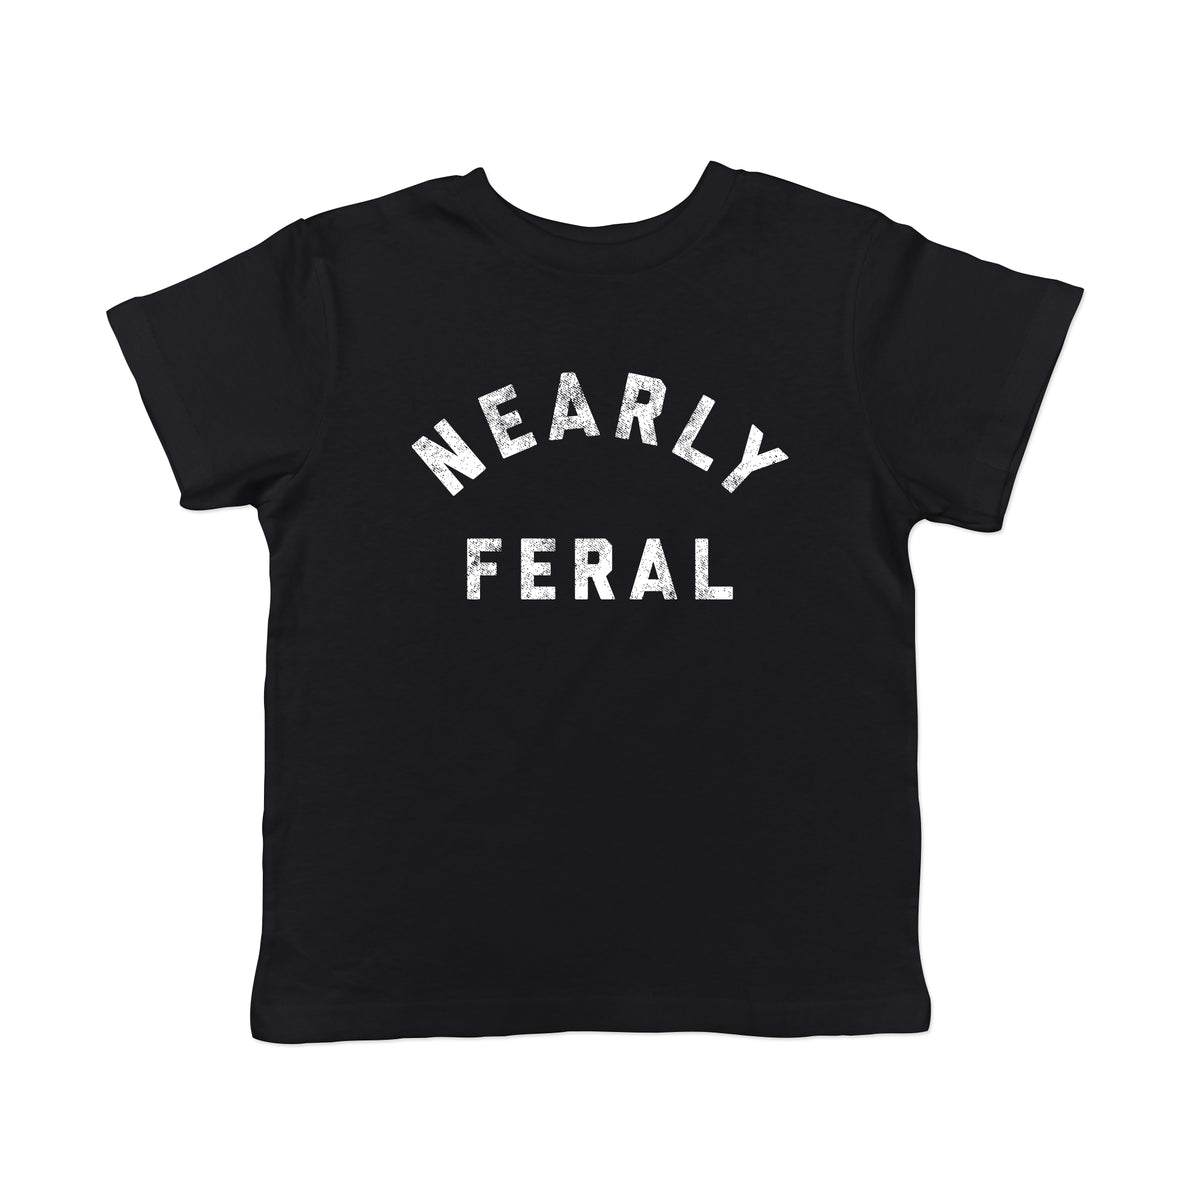 Funny Heather Black - FERAL Nearly Feral Toddler T Shirt Nerdy animal Sarcastic Tee